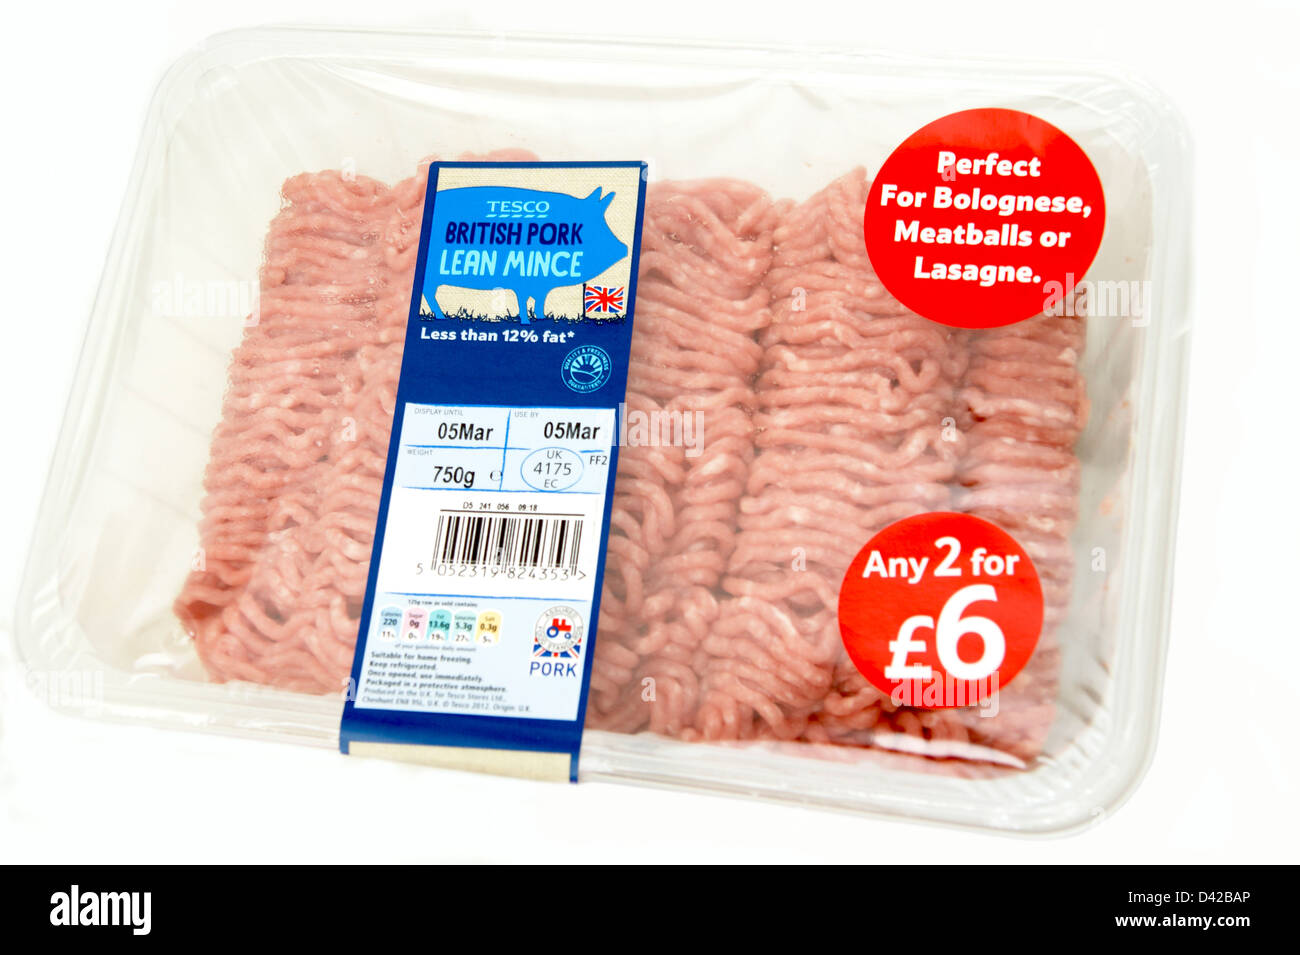 Tesco BRITISH pork lean mince healthy eating with the British logo & the little red tractor sign symbol on an offer of 2 for £6 Stock Photo